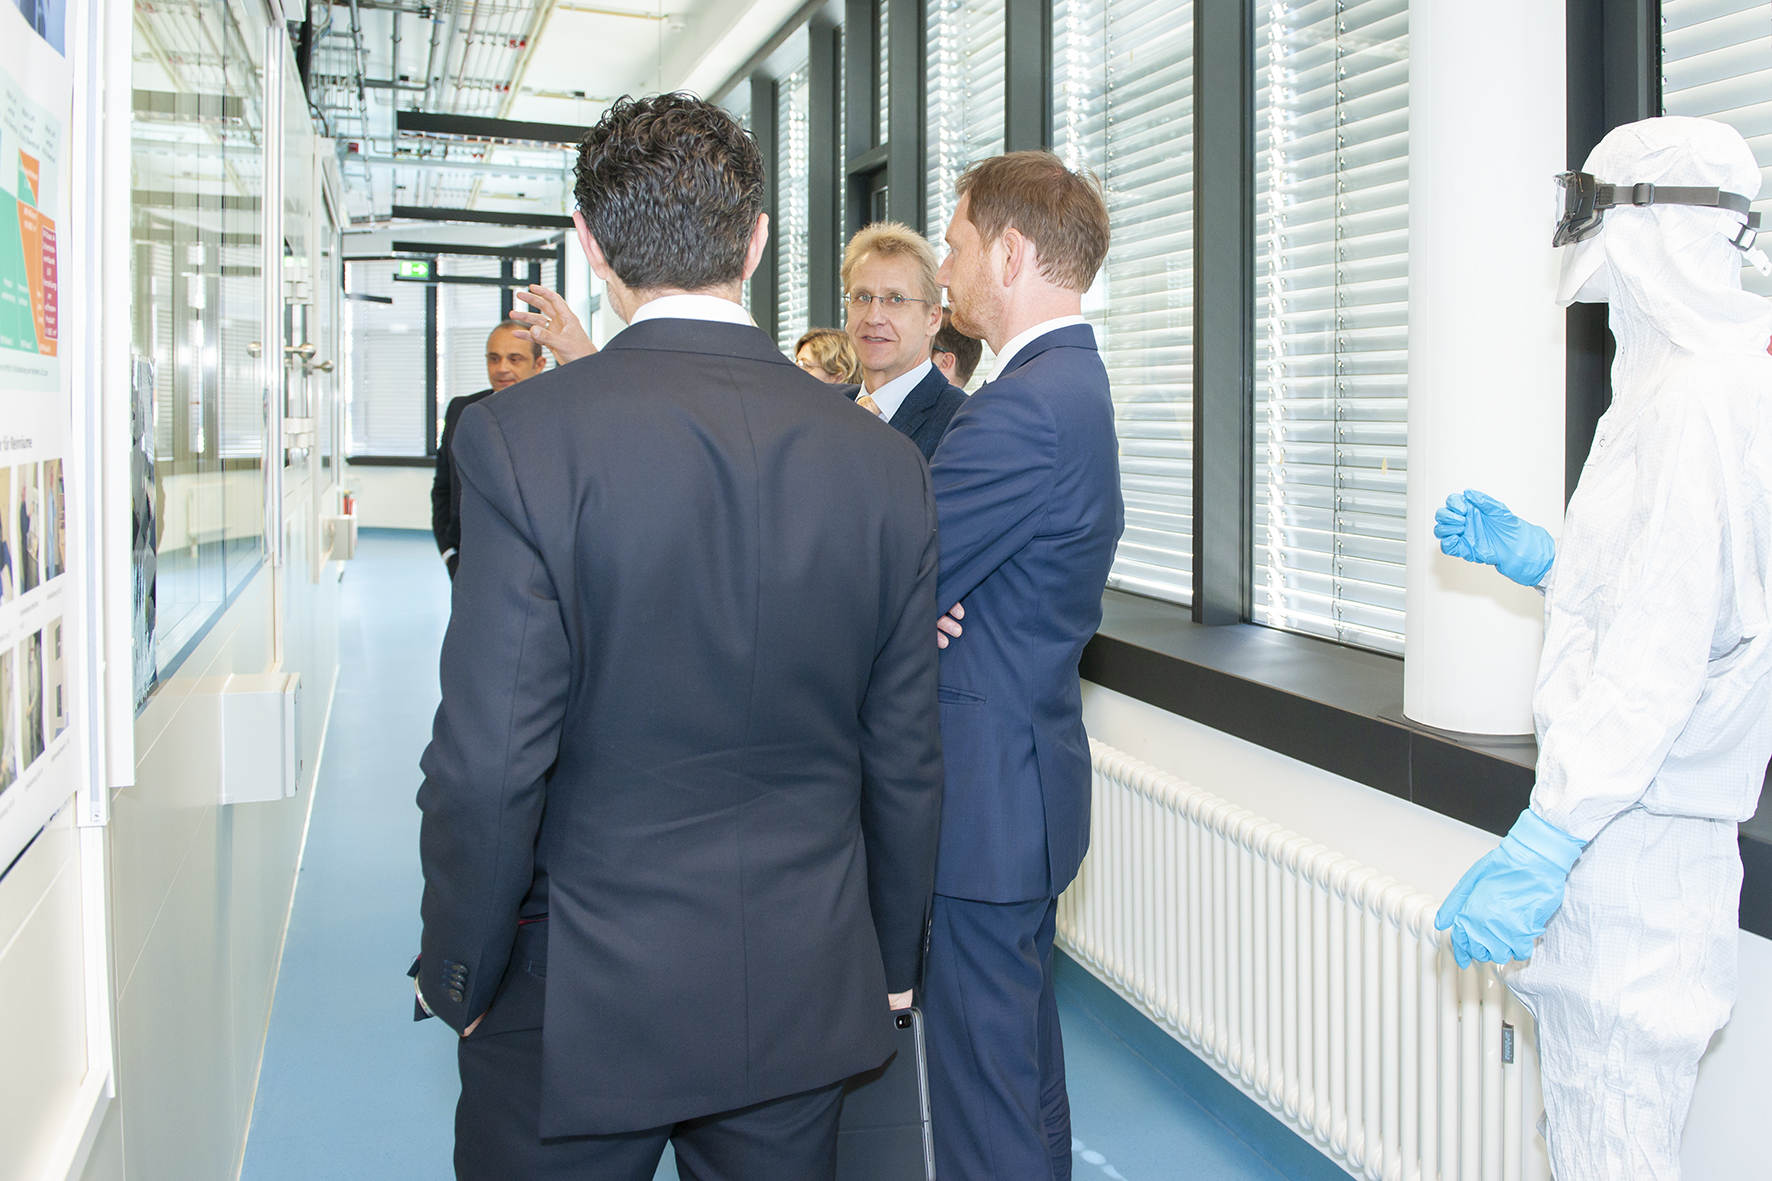 Dr. Gerno Schmiedeknecht, Head of Main Department of GMP Cell and Gene Therapy, guided the guests along the cleanroom facilities of Fraunhofer IZI.